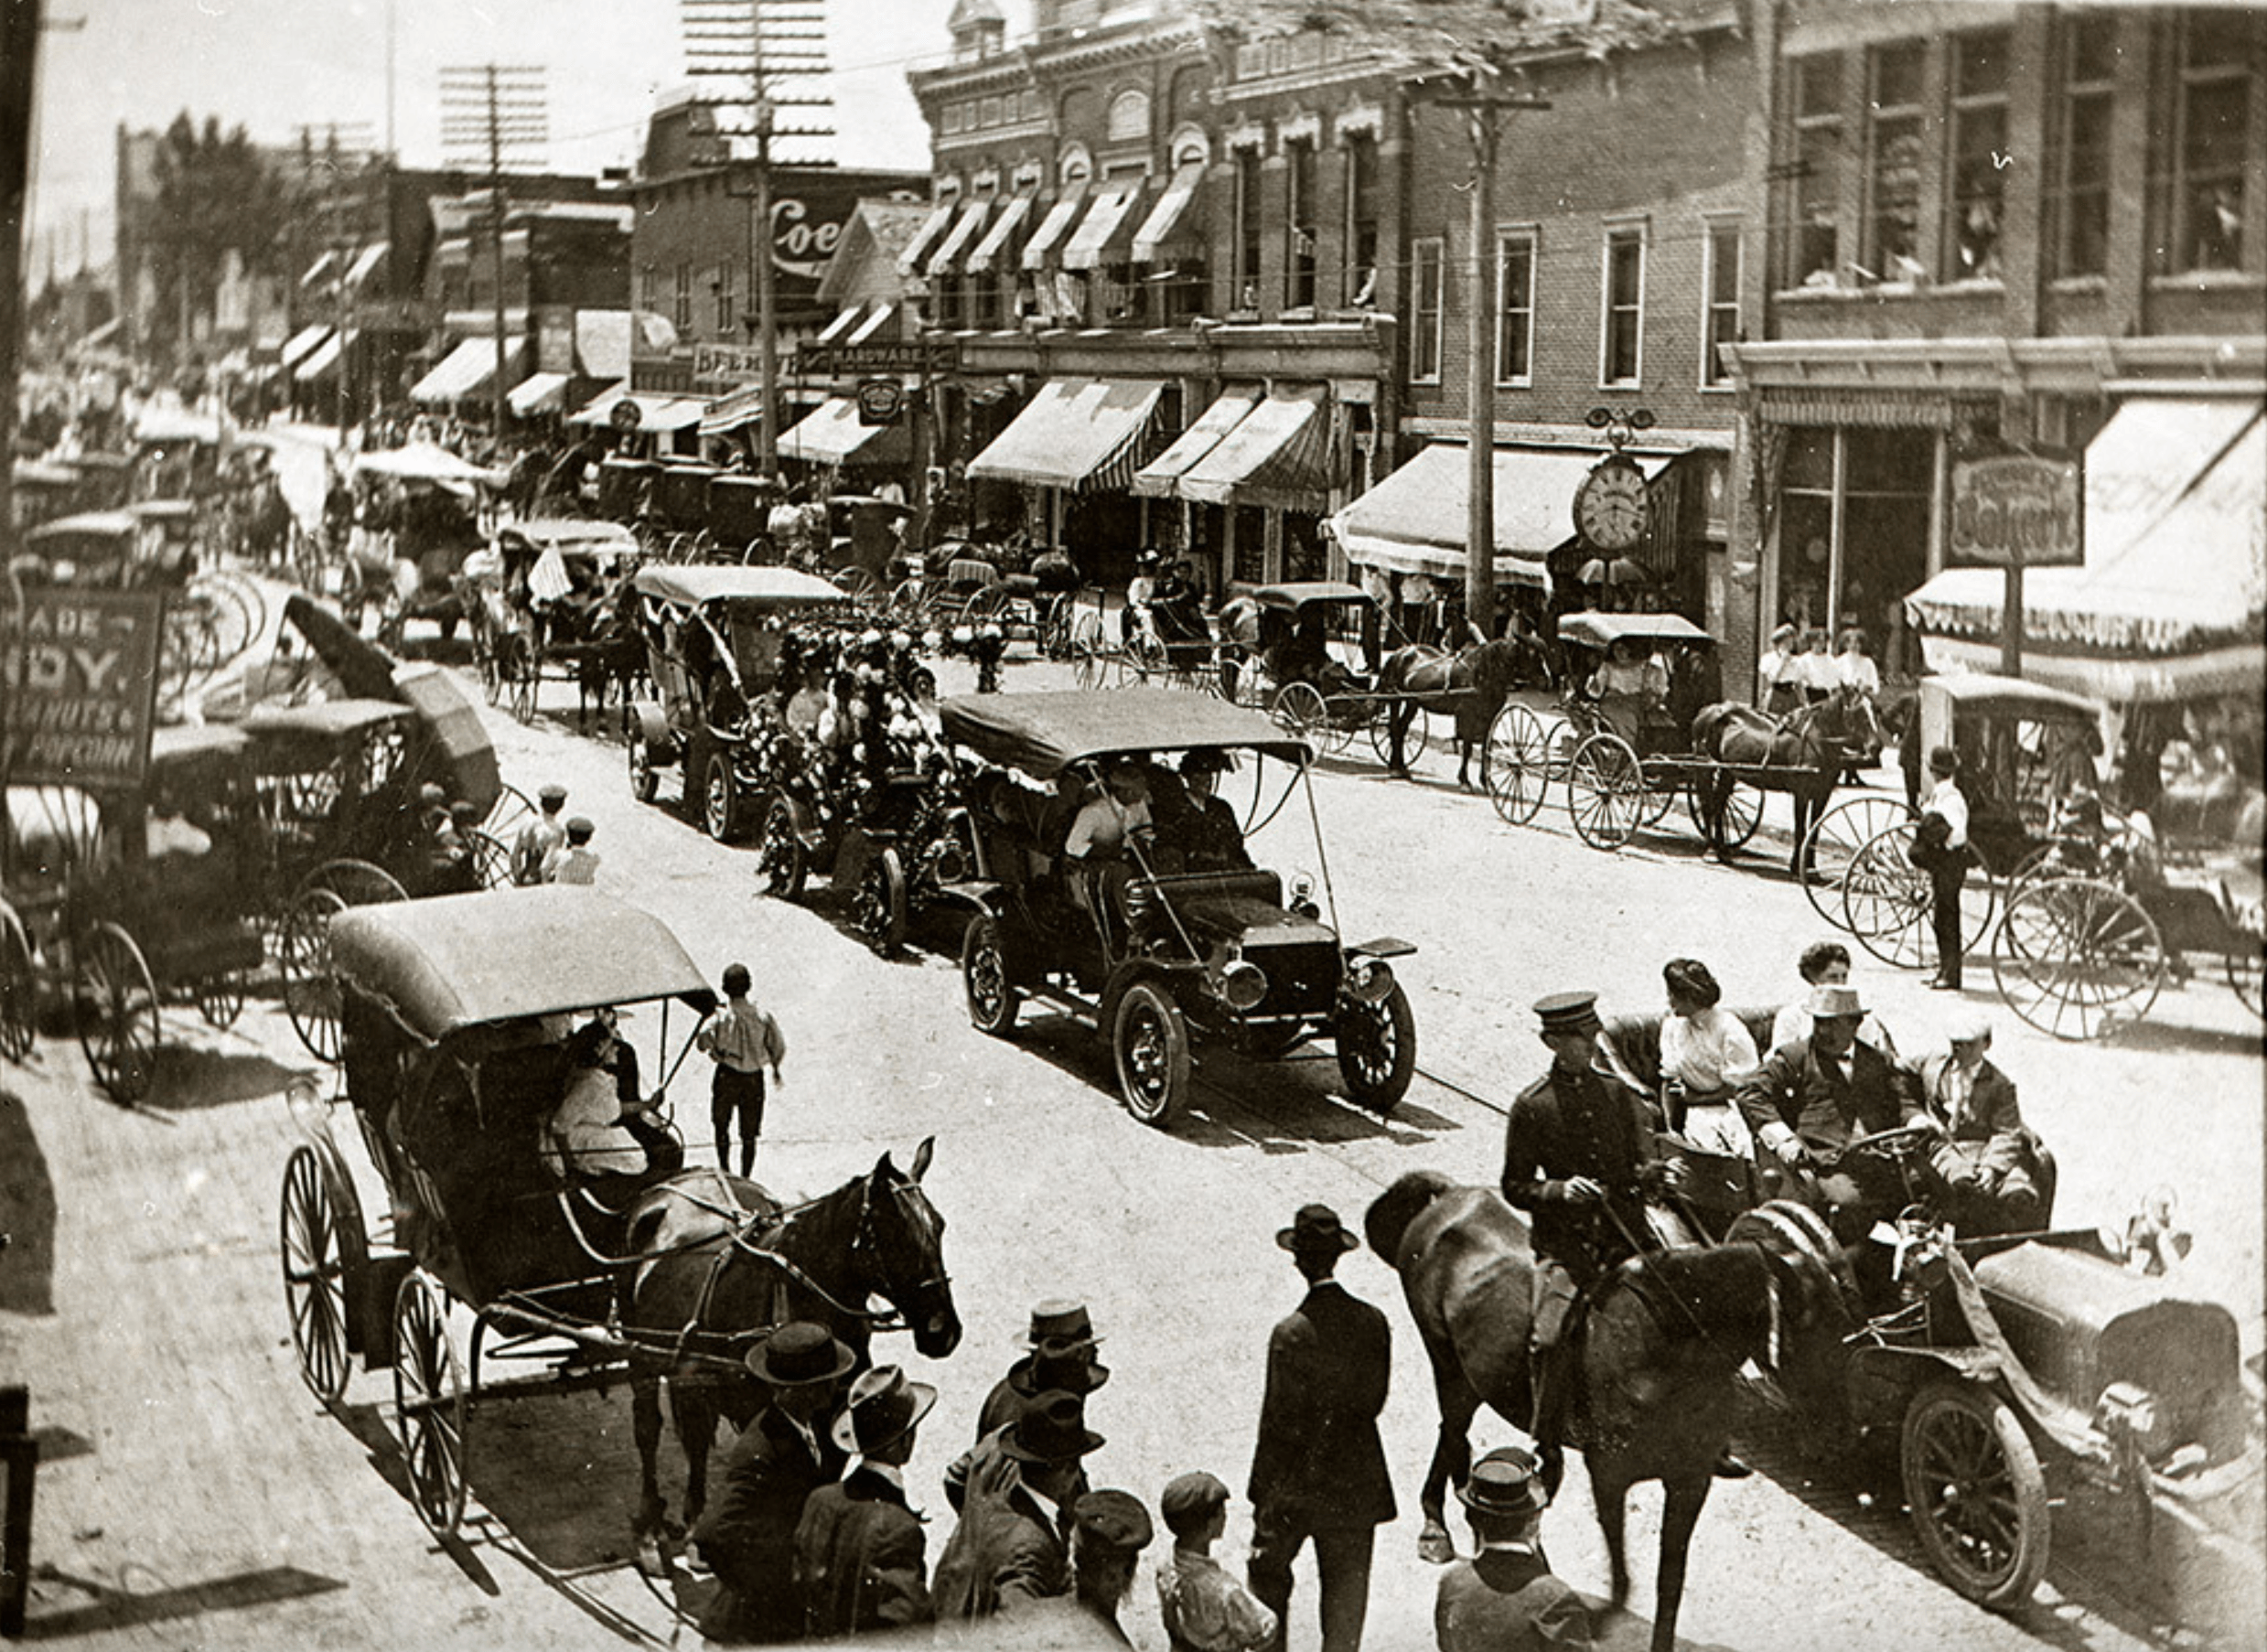 Cars and carriages are seen on Main Street in Bowling Green during a parade circa 1910. 